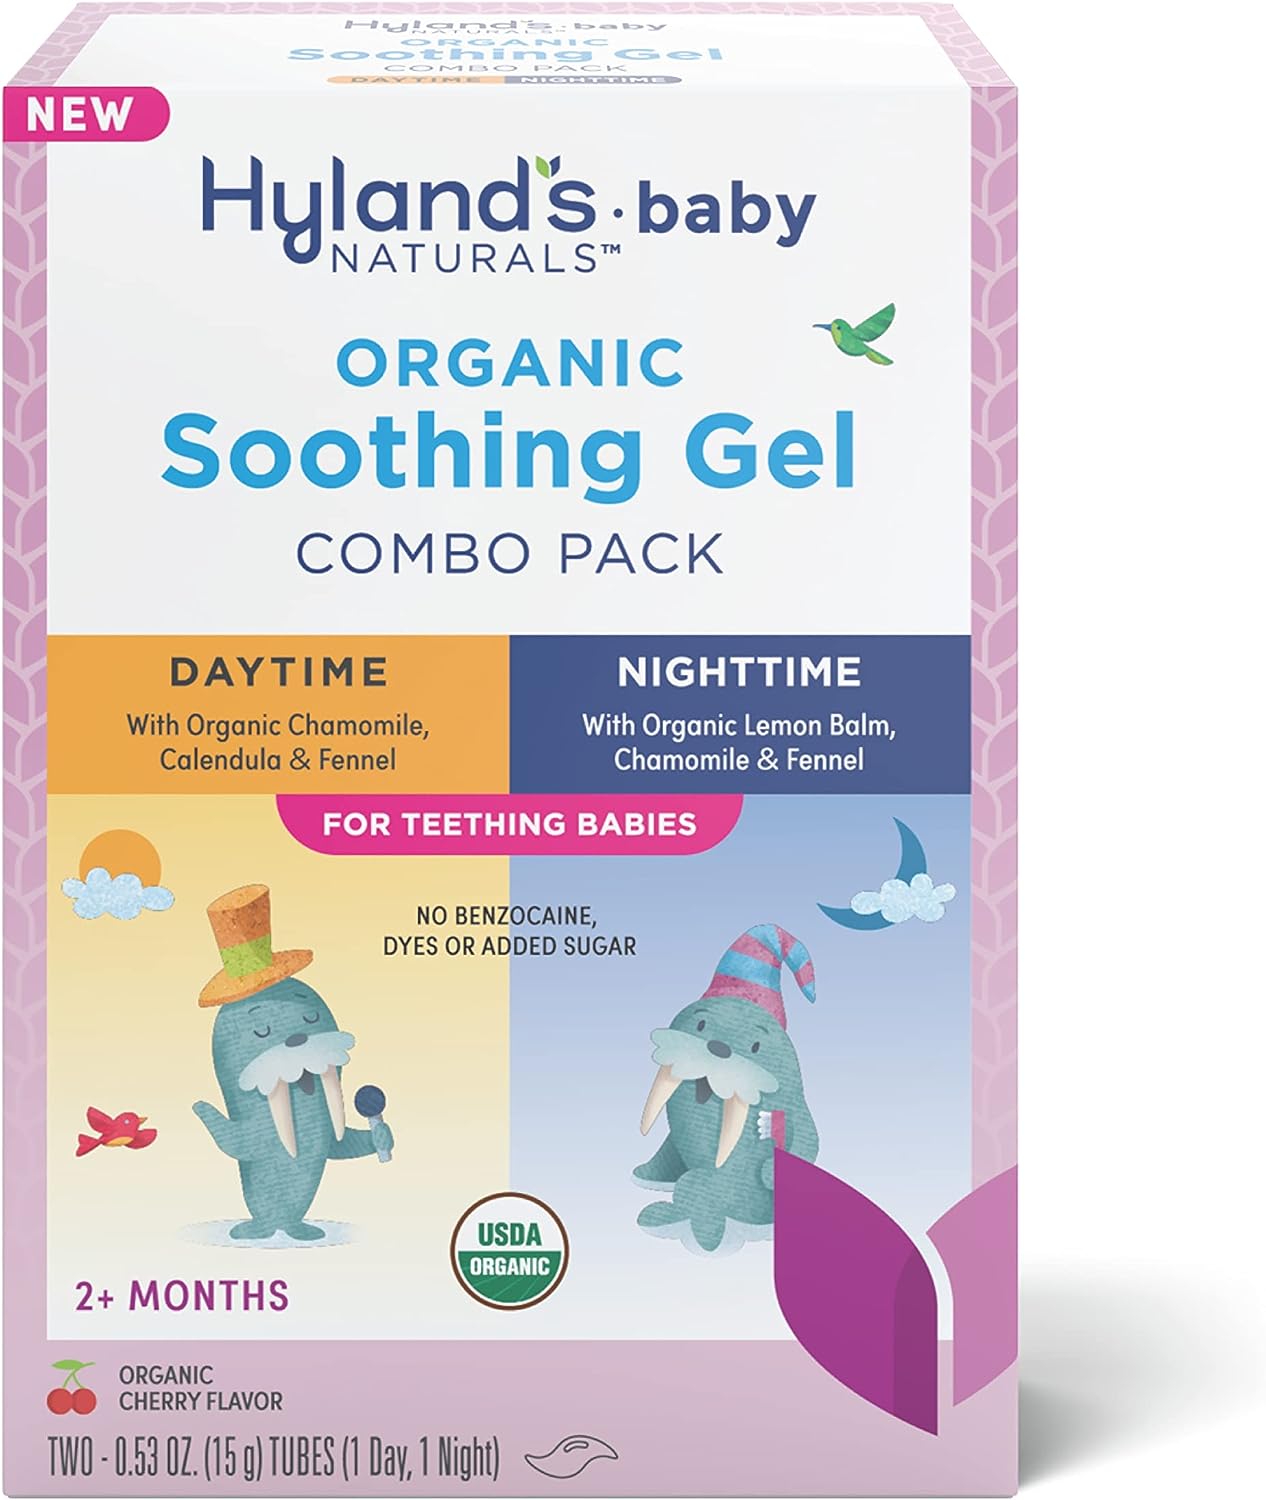 Hyland's Naturals Baby - Organic Day/Night Soothing Gel Combo Pack, Natural Relief of Oral Discomfort, Irritability & Swelling, Easy-to-Apply, Ages 2 Months & Up, 1.06 Ounce (2 Tubes of 0.53 oz.)